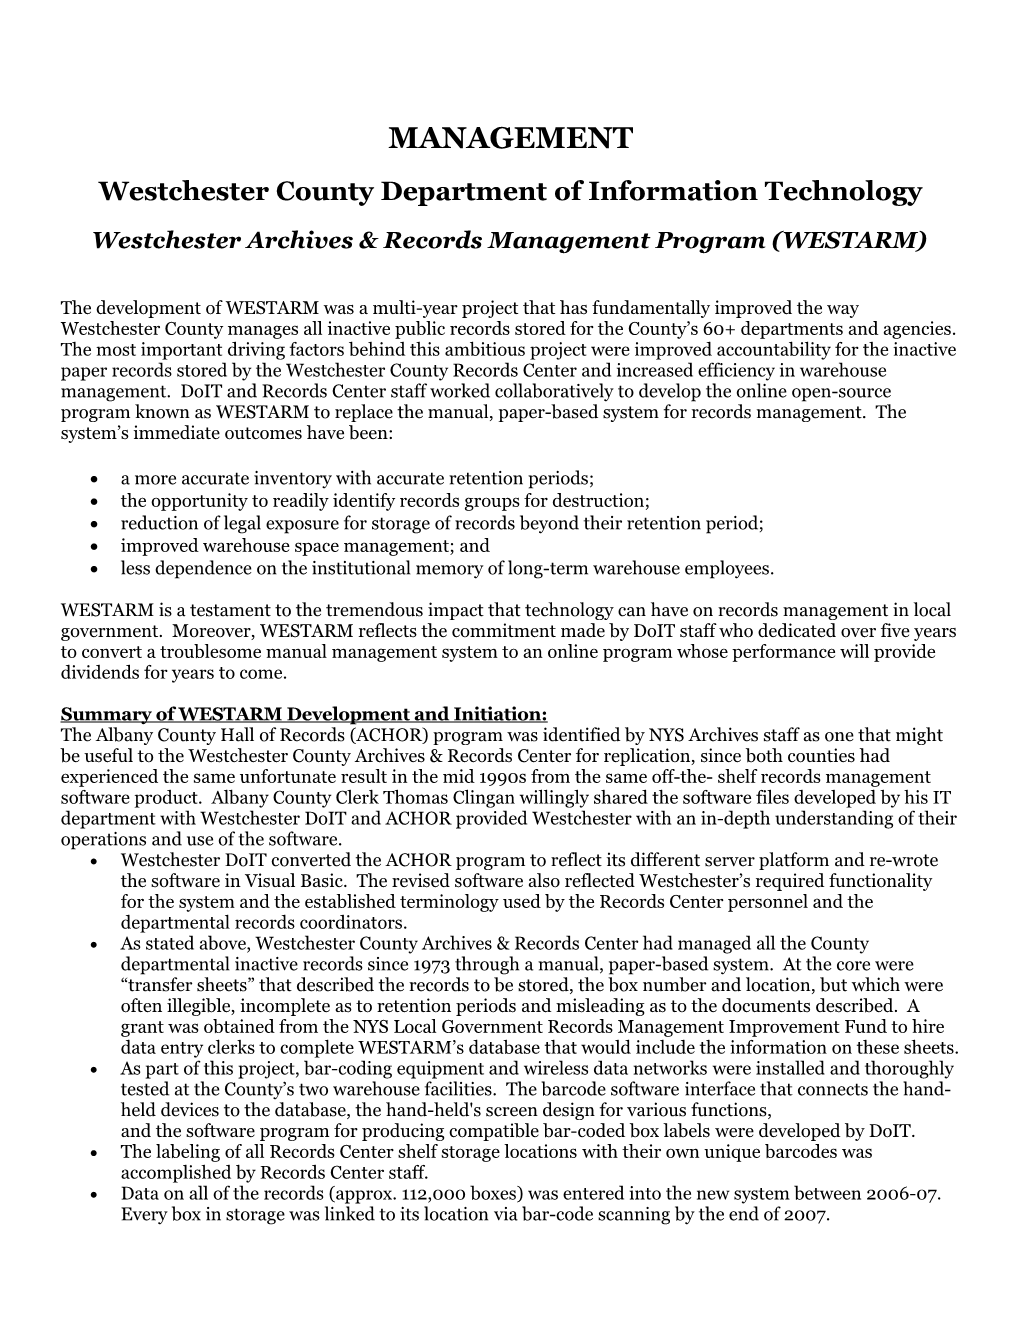 Westchester County Department of Information Technology